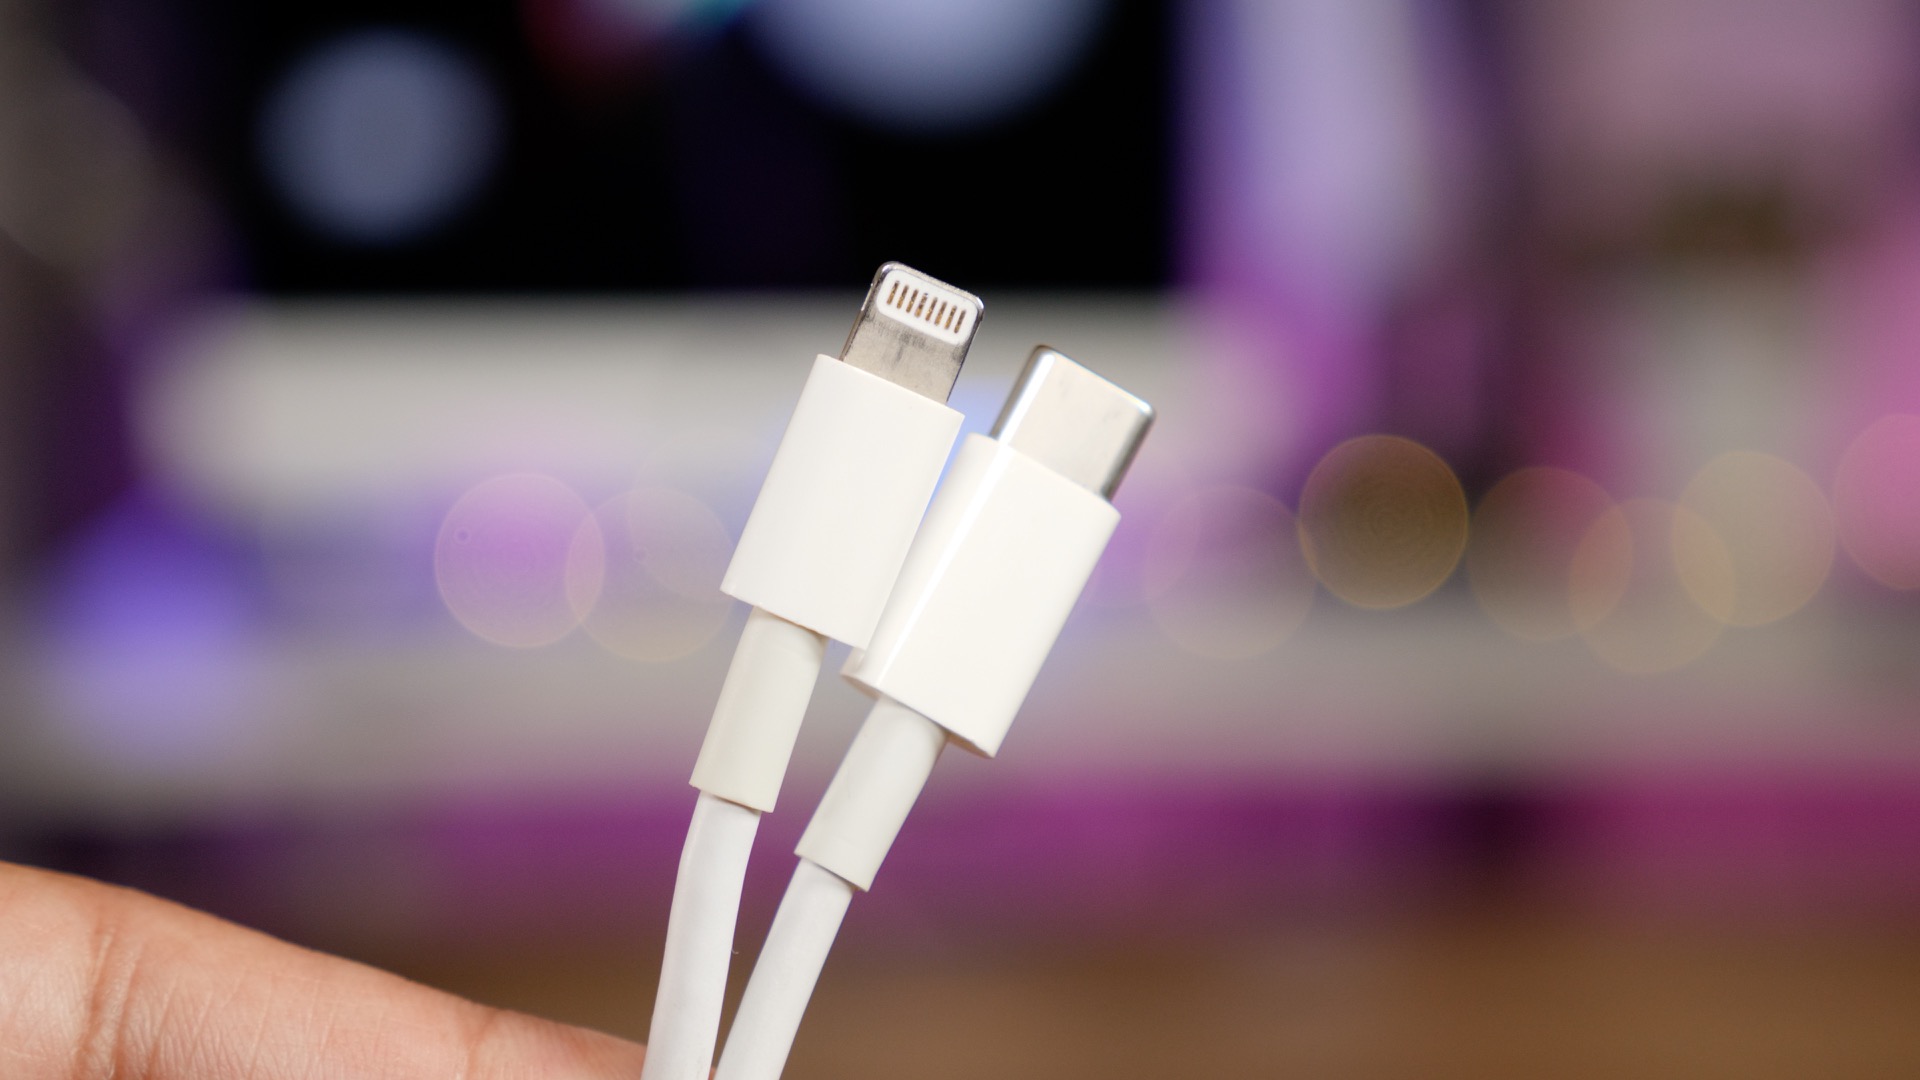 Rumor: New iPhones may be first to bundle USB-C fast charging - 9to5Mac